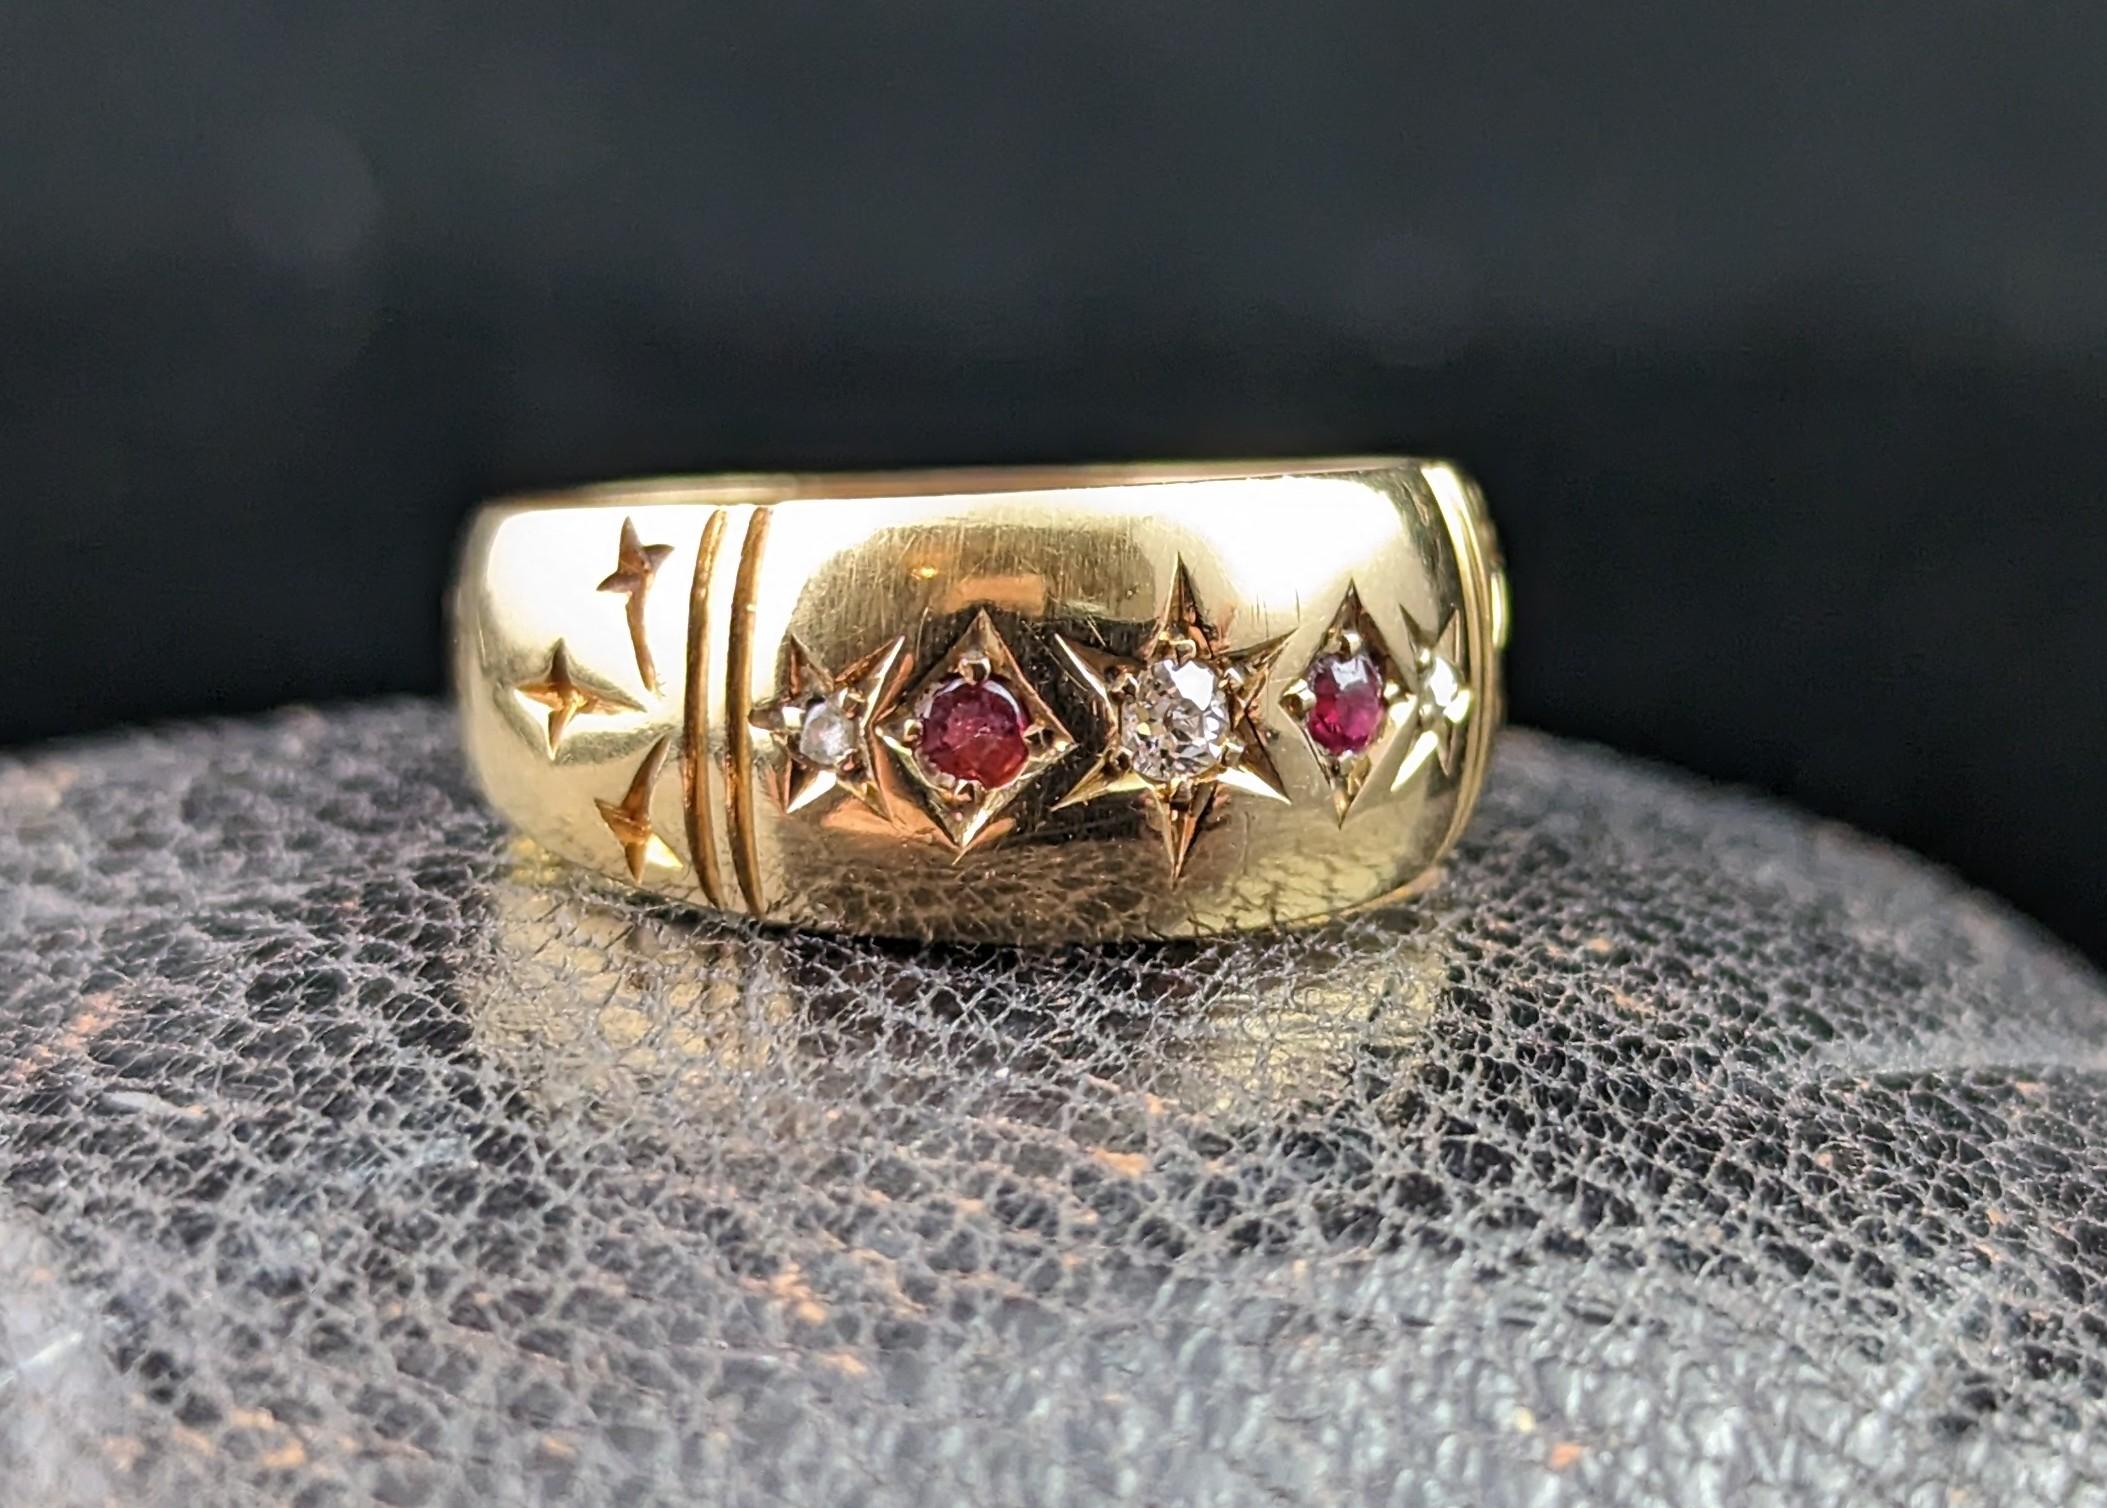 I can't say enough about this stunning antique, late Edwardian era Ruby and Diamond ring in 18k yellow gold.

One of our favourite styles here at StolenAttic and a firm customer favourite.

This beautiful ring is a five stone, Gypsy set ring with a